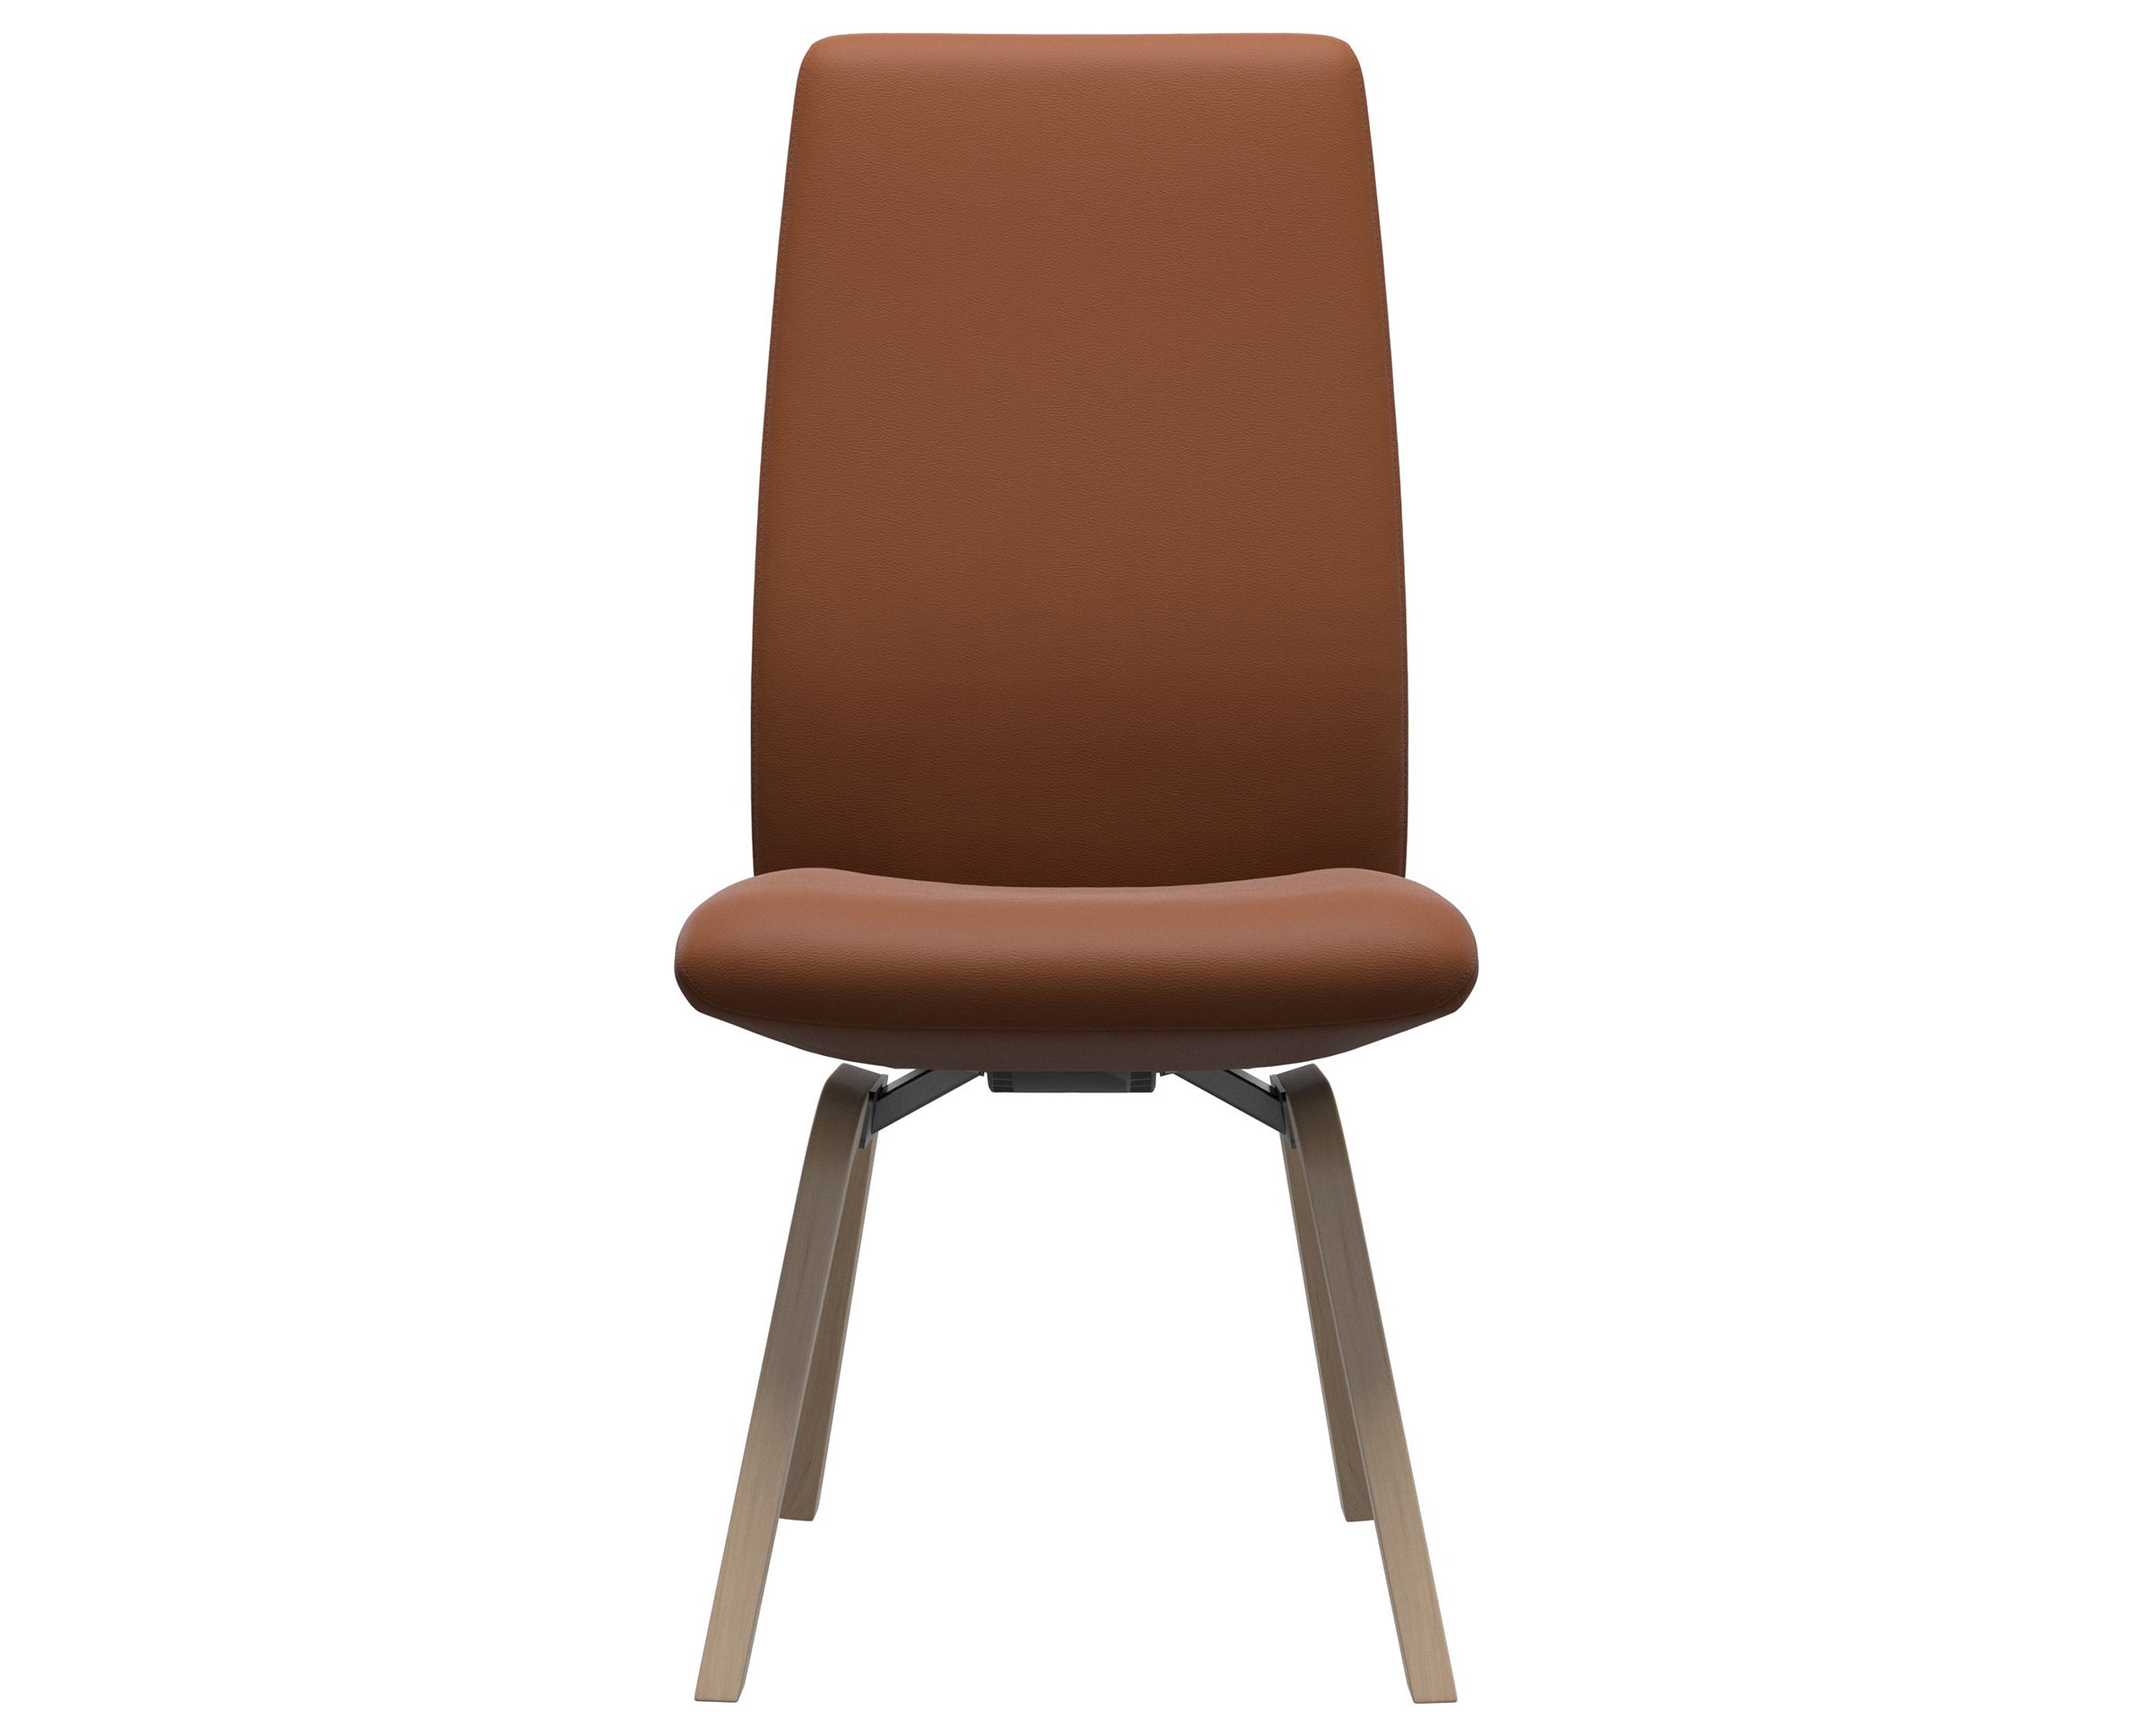 Paloma Leather New Cognac and Natural Base | Stressless Laurel High Back D200 Dining Chair | Valley Ridge Furniture